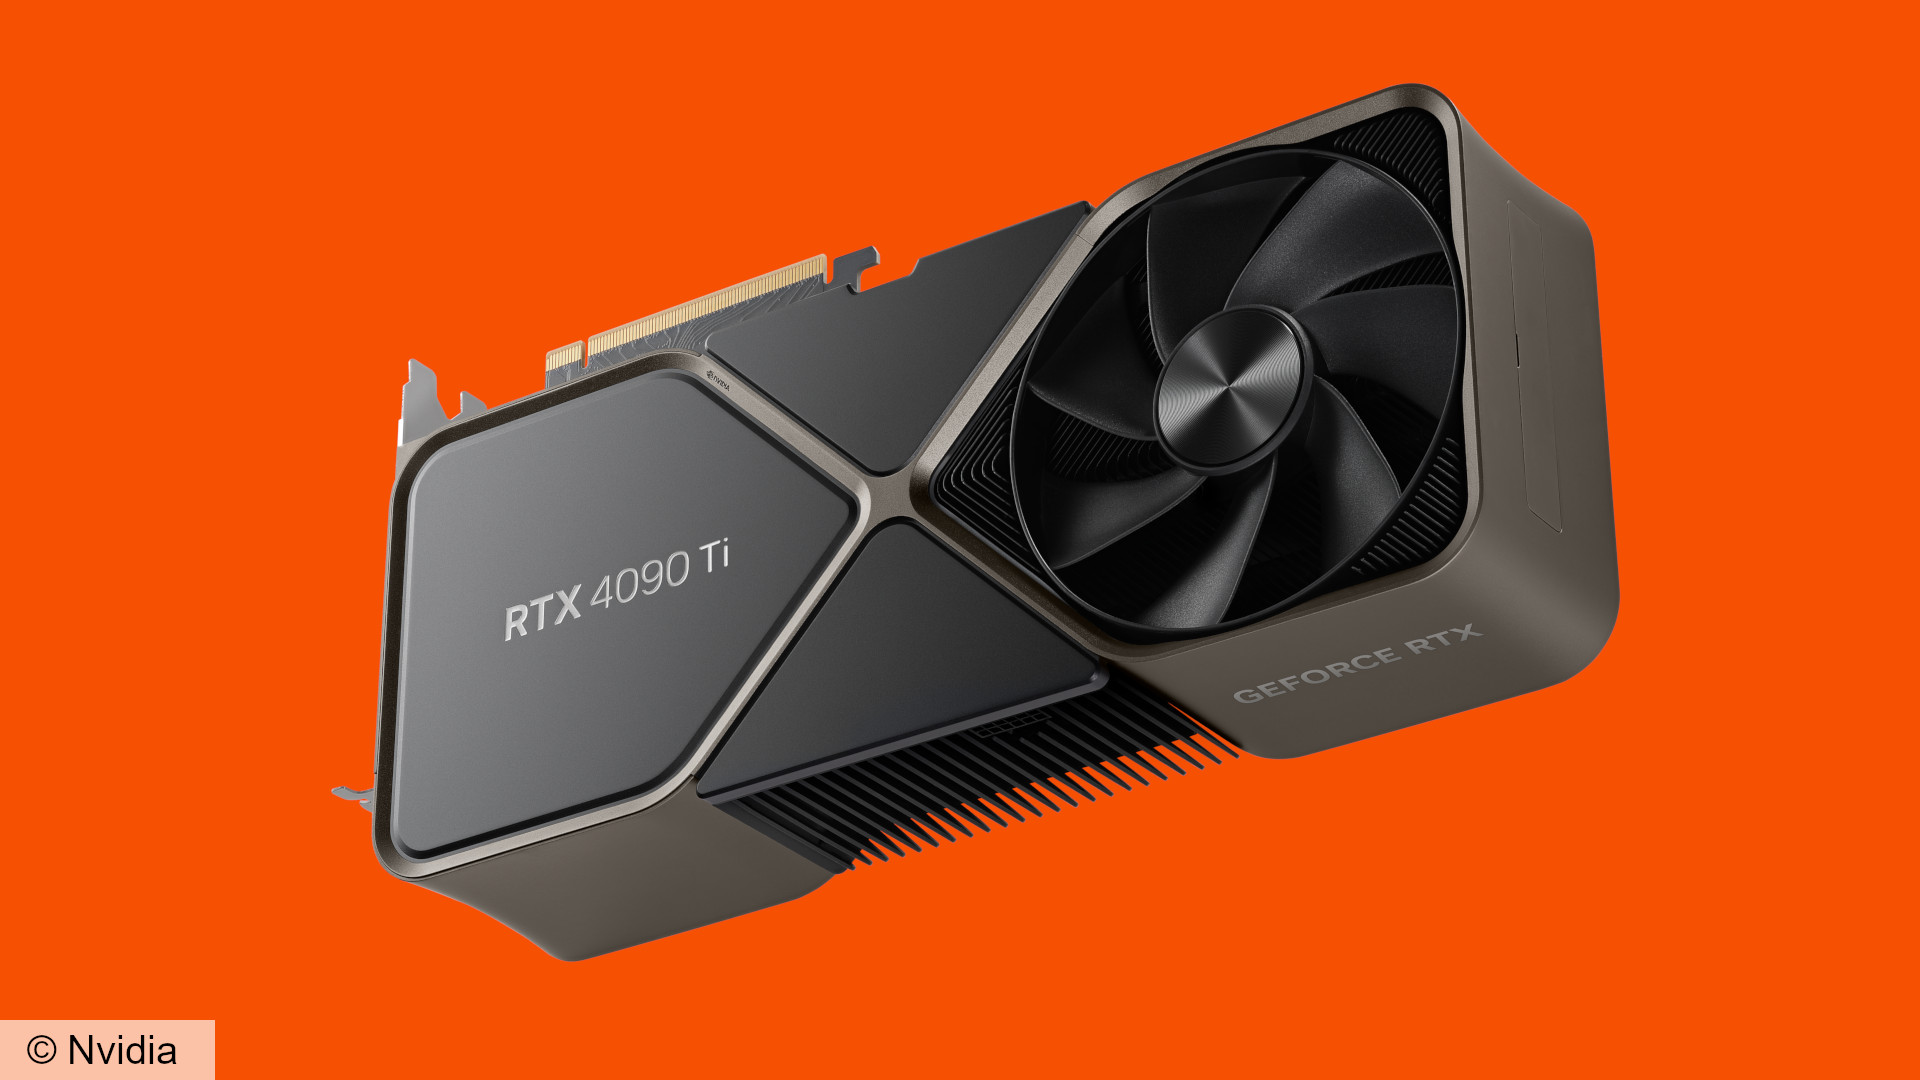 Gamers do NOT need an RTX 4090 Ti GPU from NVIDIA